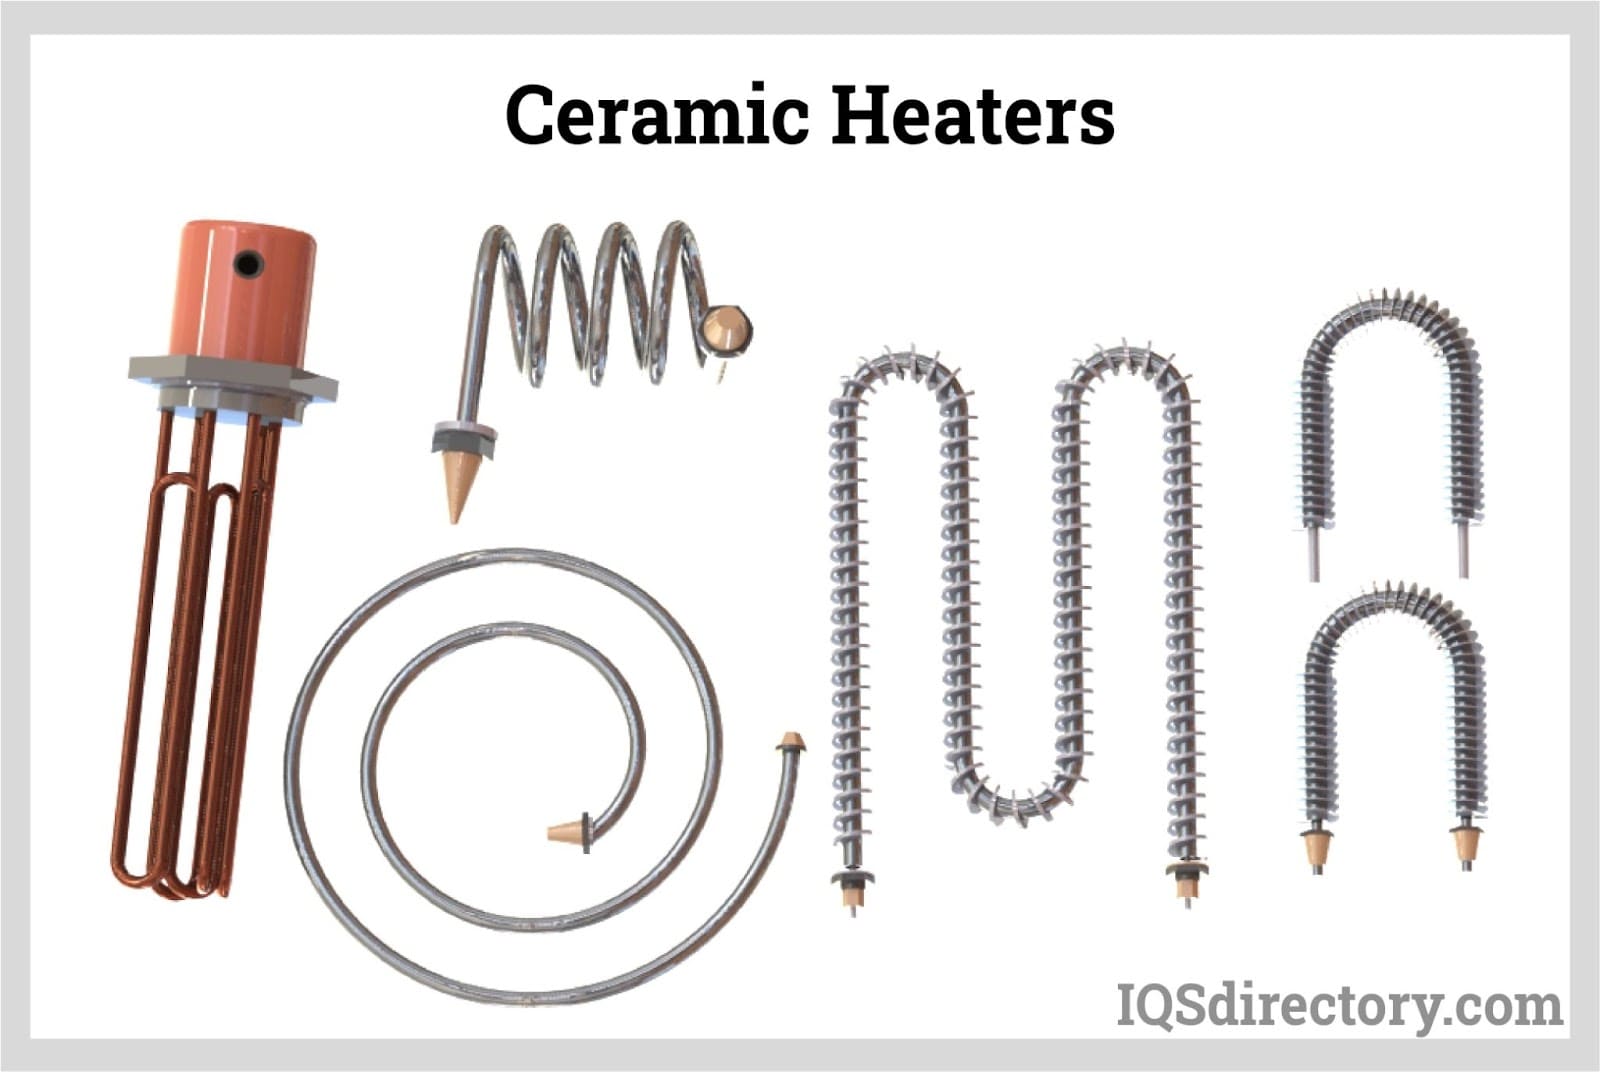 https://www.iqsdirectory.com/articles/electric-heater/ceramic-heater/ceramic-heaters.jpg